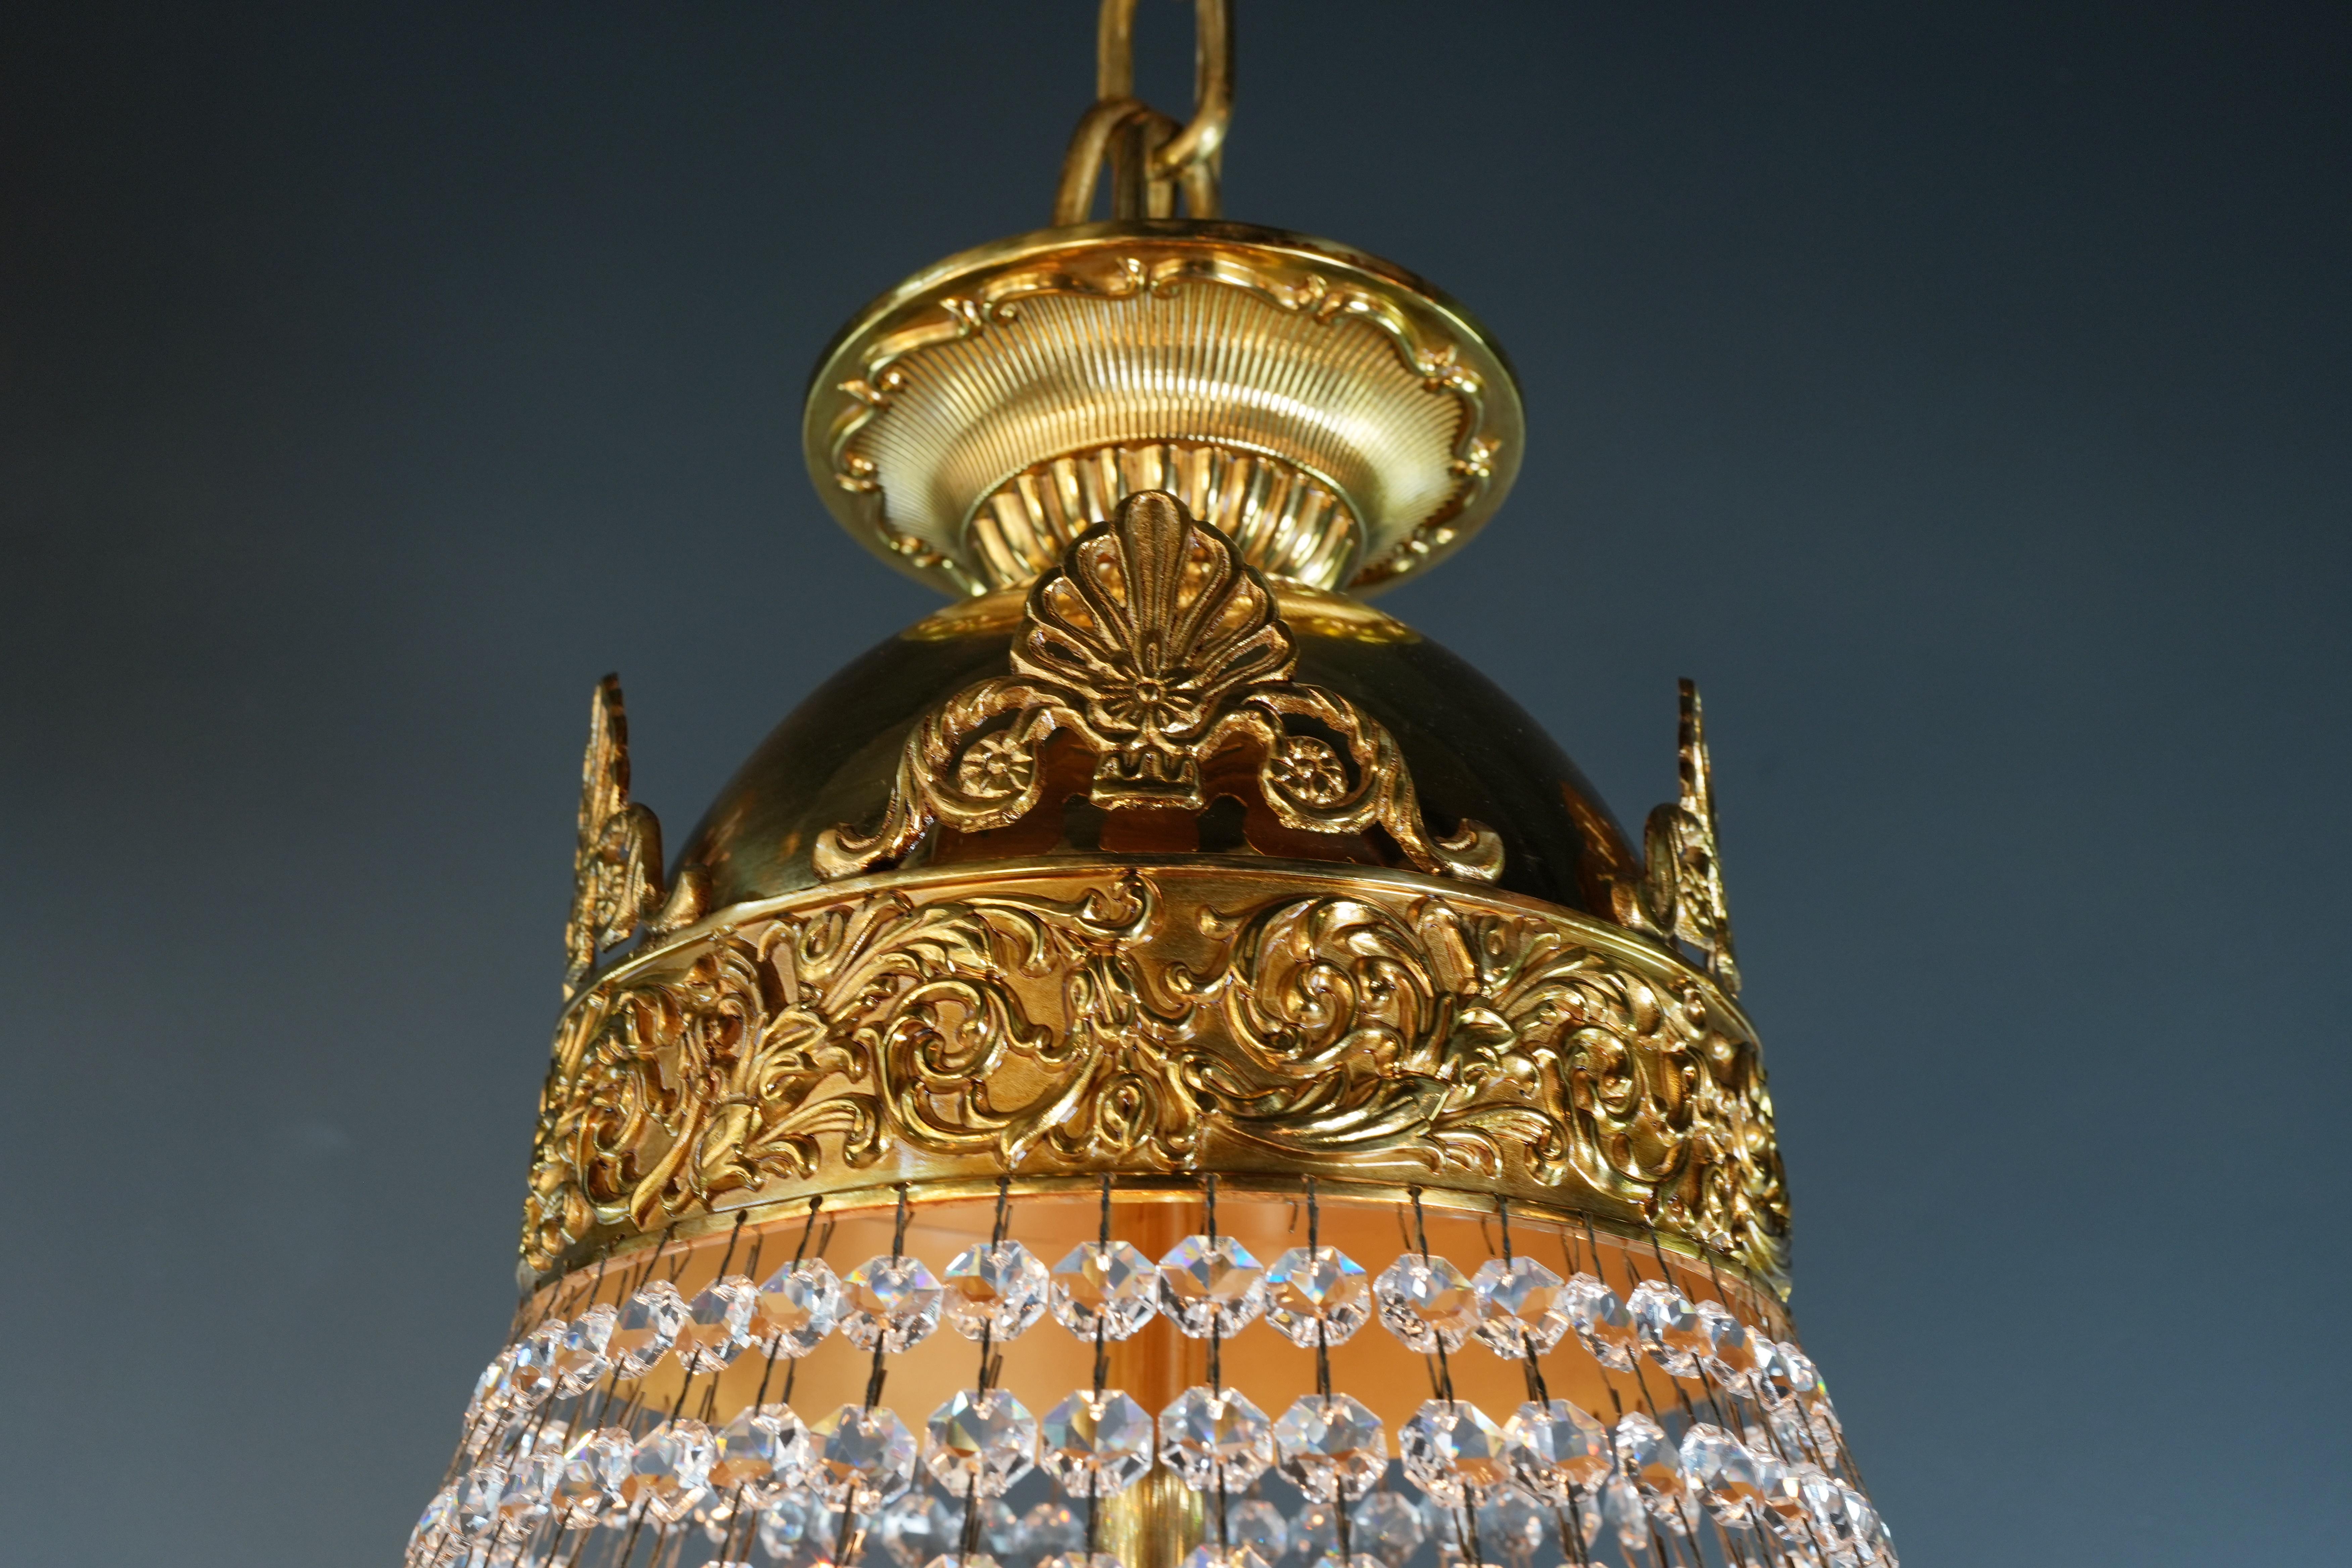 Brass Basket Empire Sac a Pearl Chandelier Crystal Lustre Lamp Antique Gold 2 For Sale 3